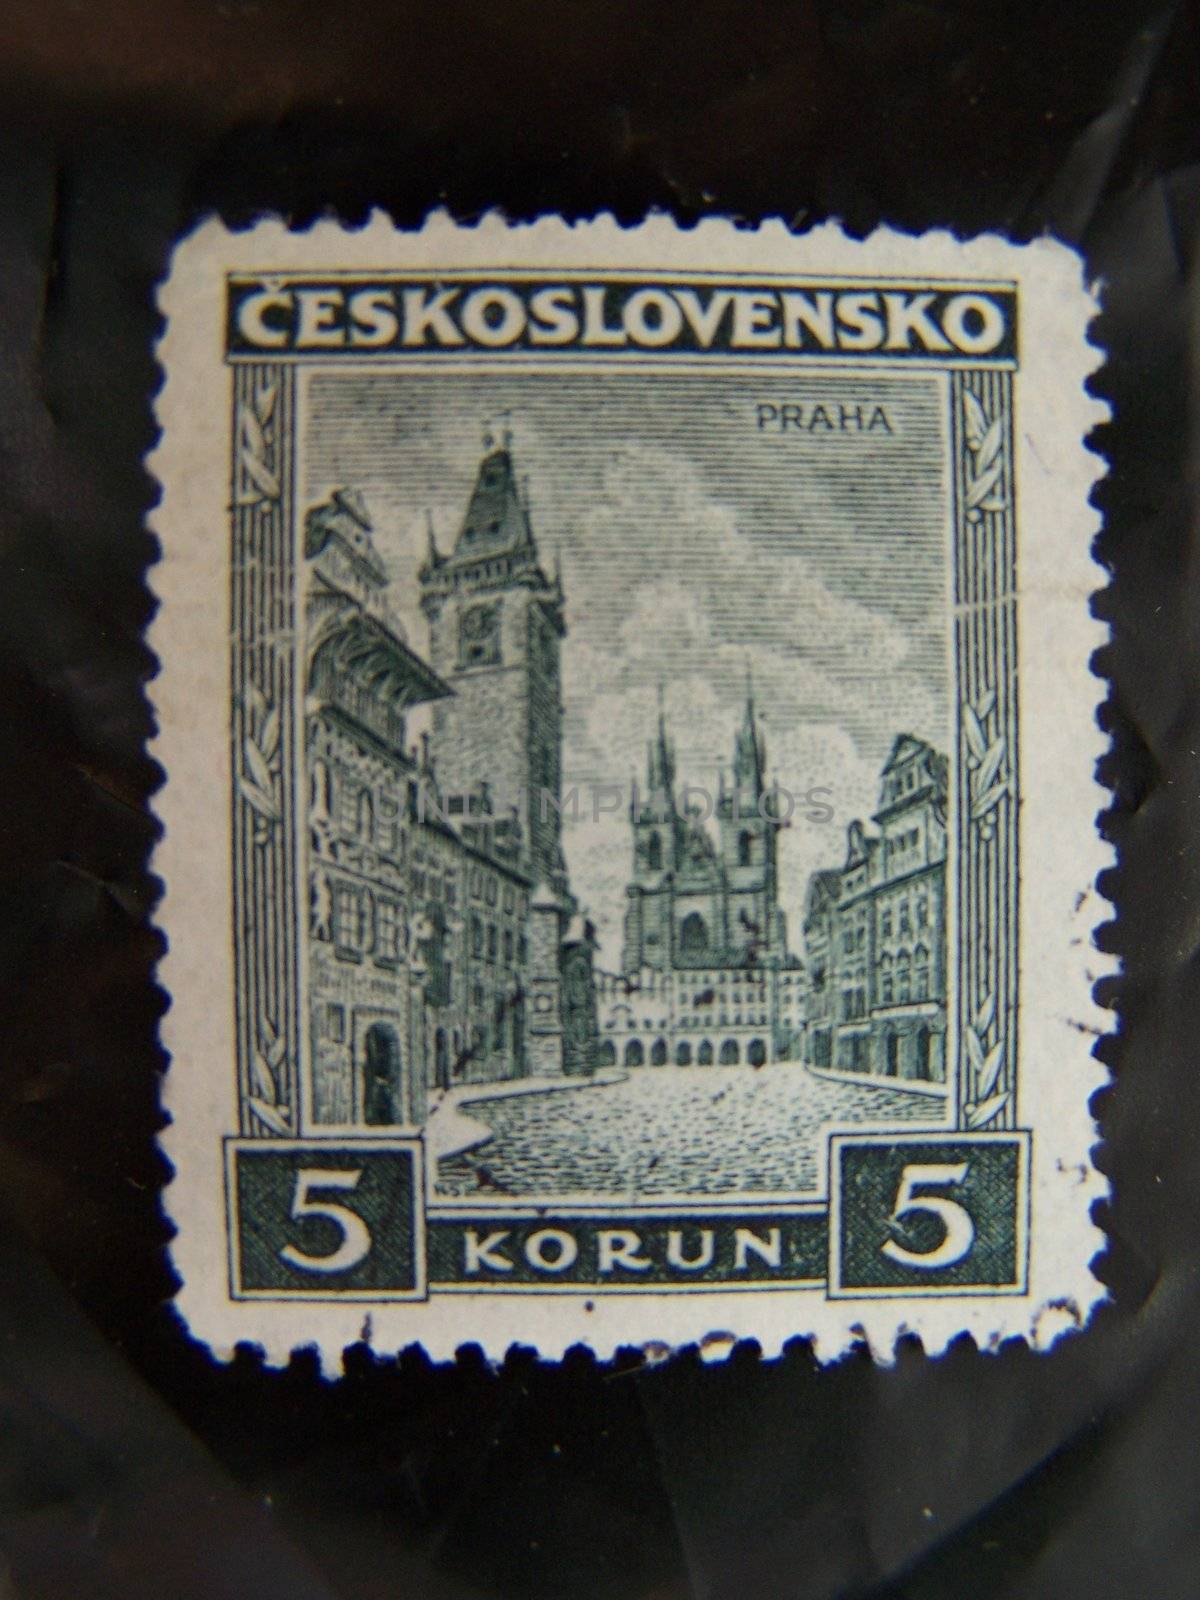 stamps from Czechoslovakia by paolo77